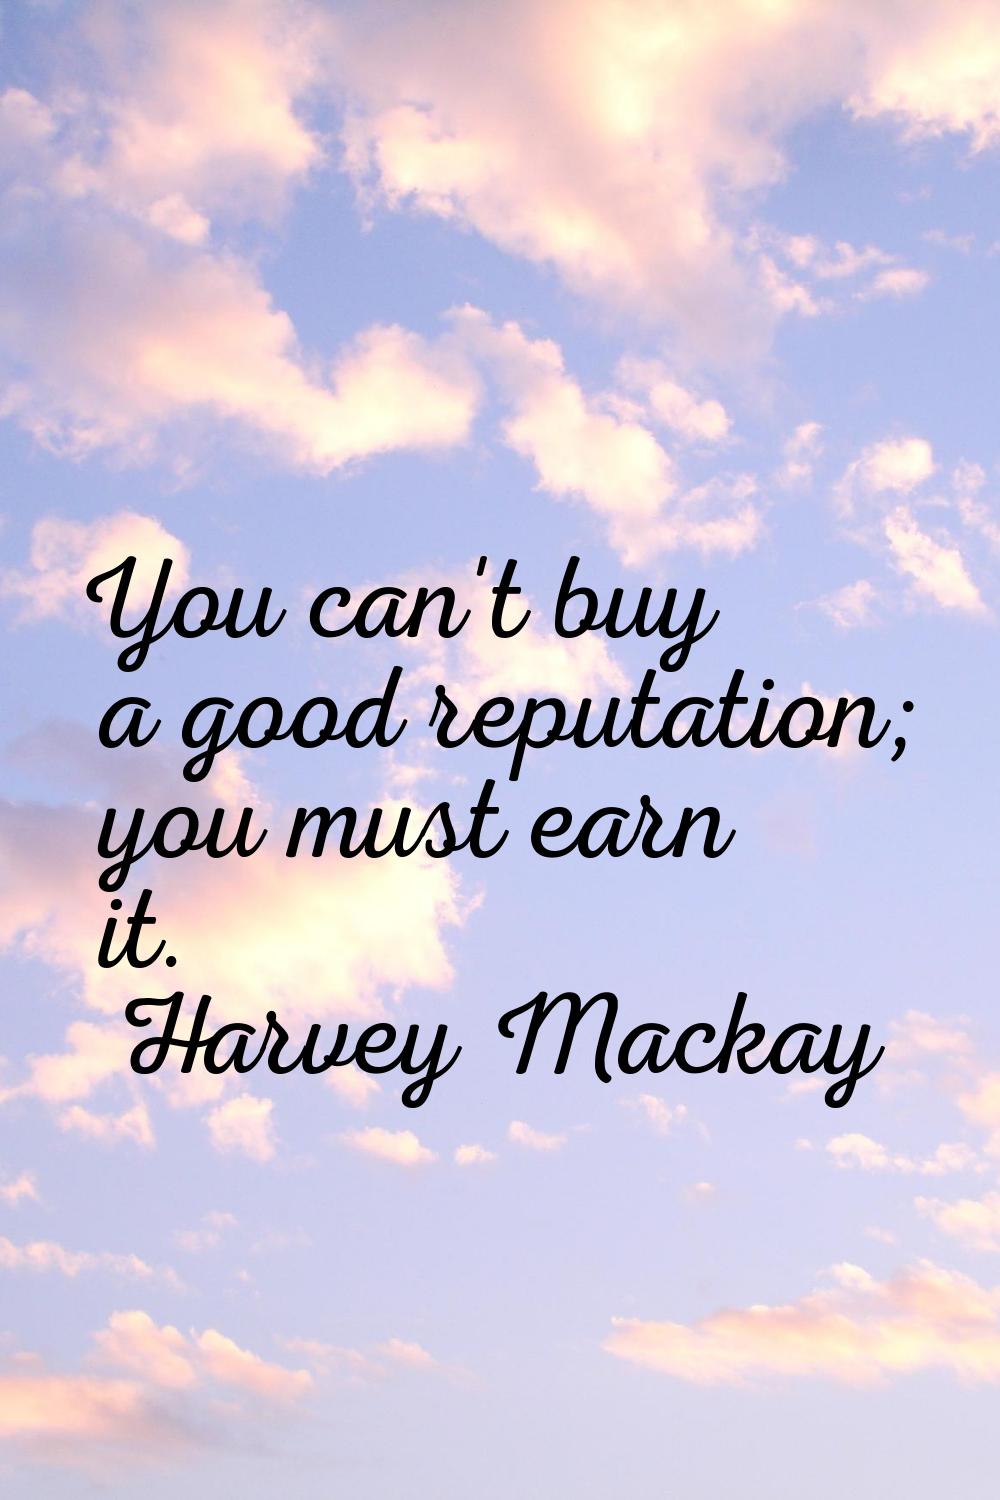 You can't buy a good reputation; you must earn it.